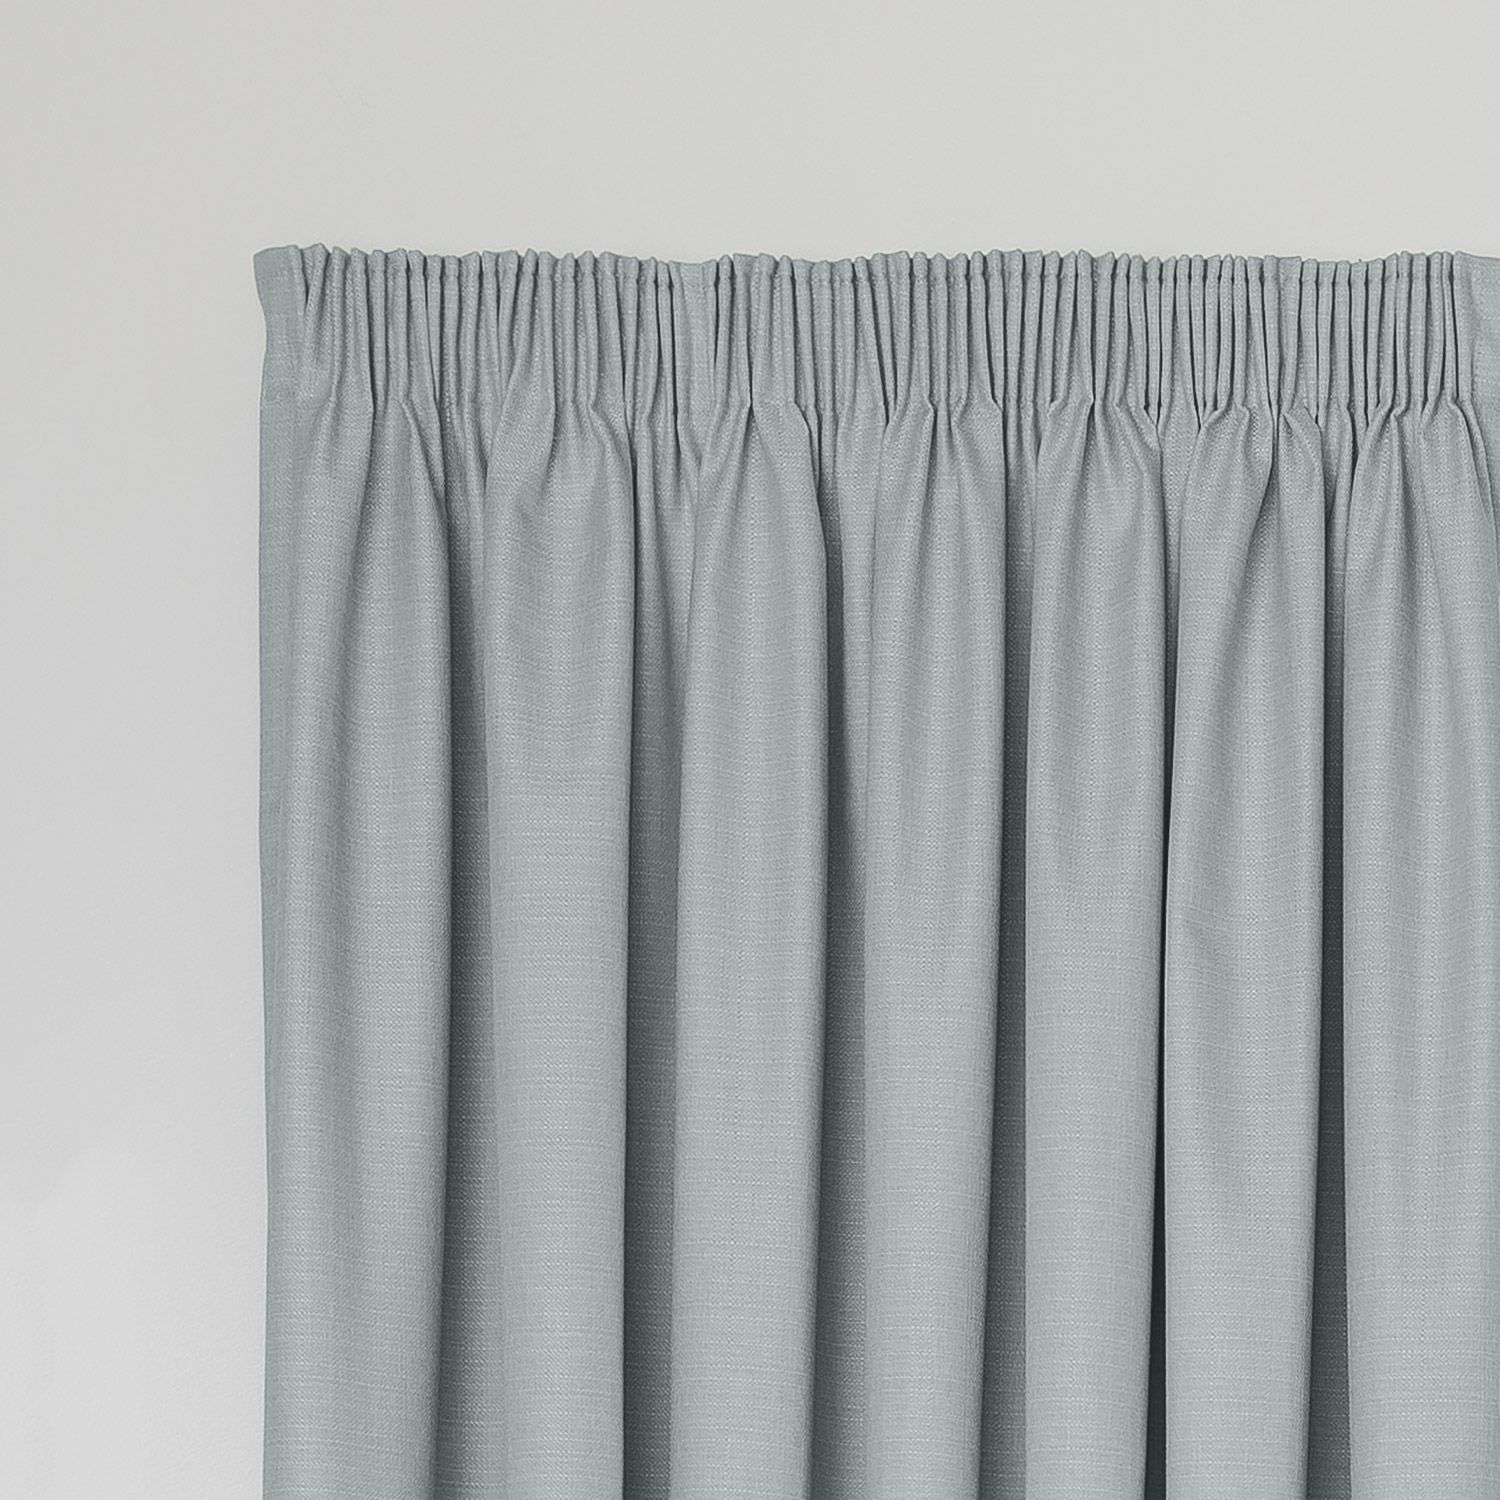 Chic Readymade Curtains for Effortless Window Dressing